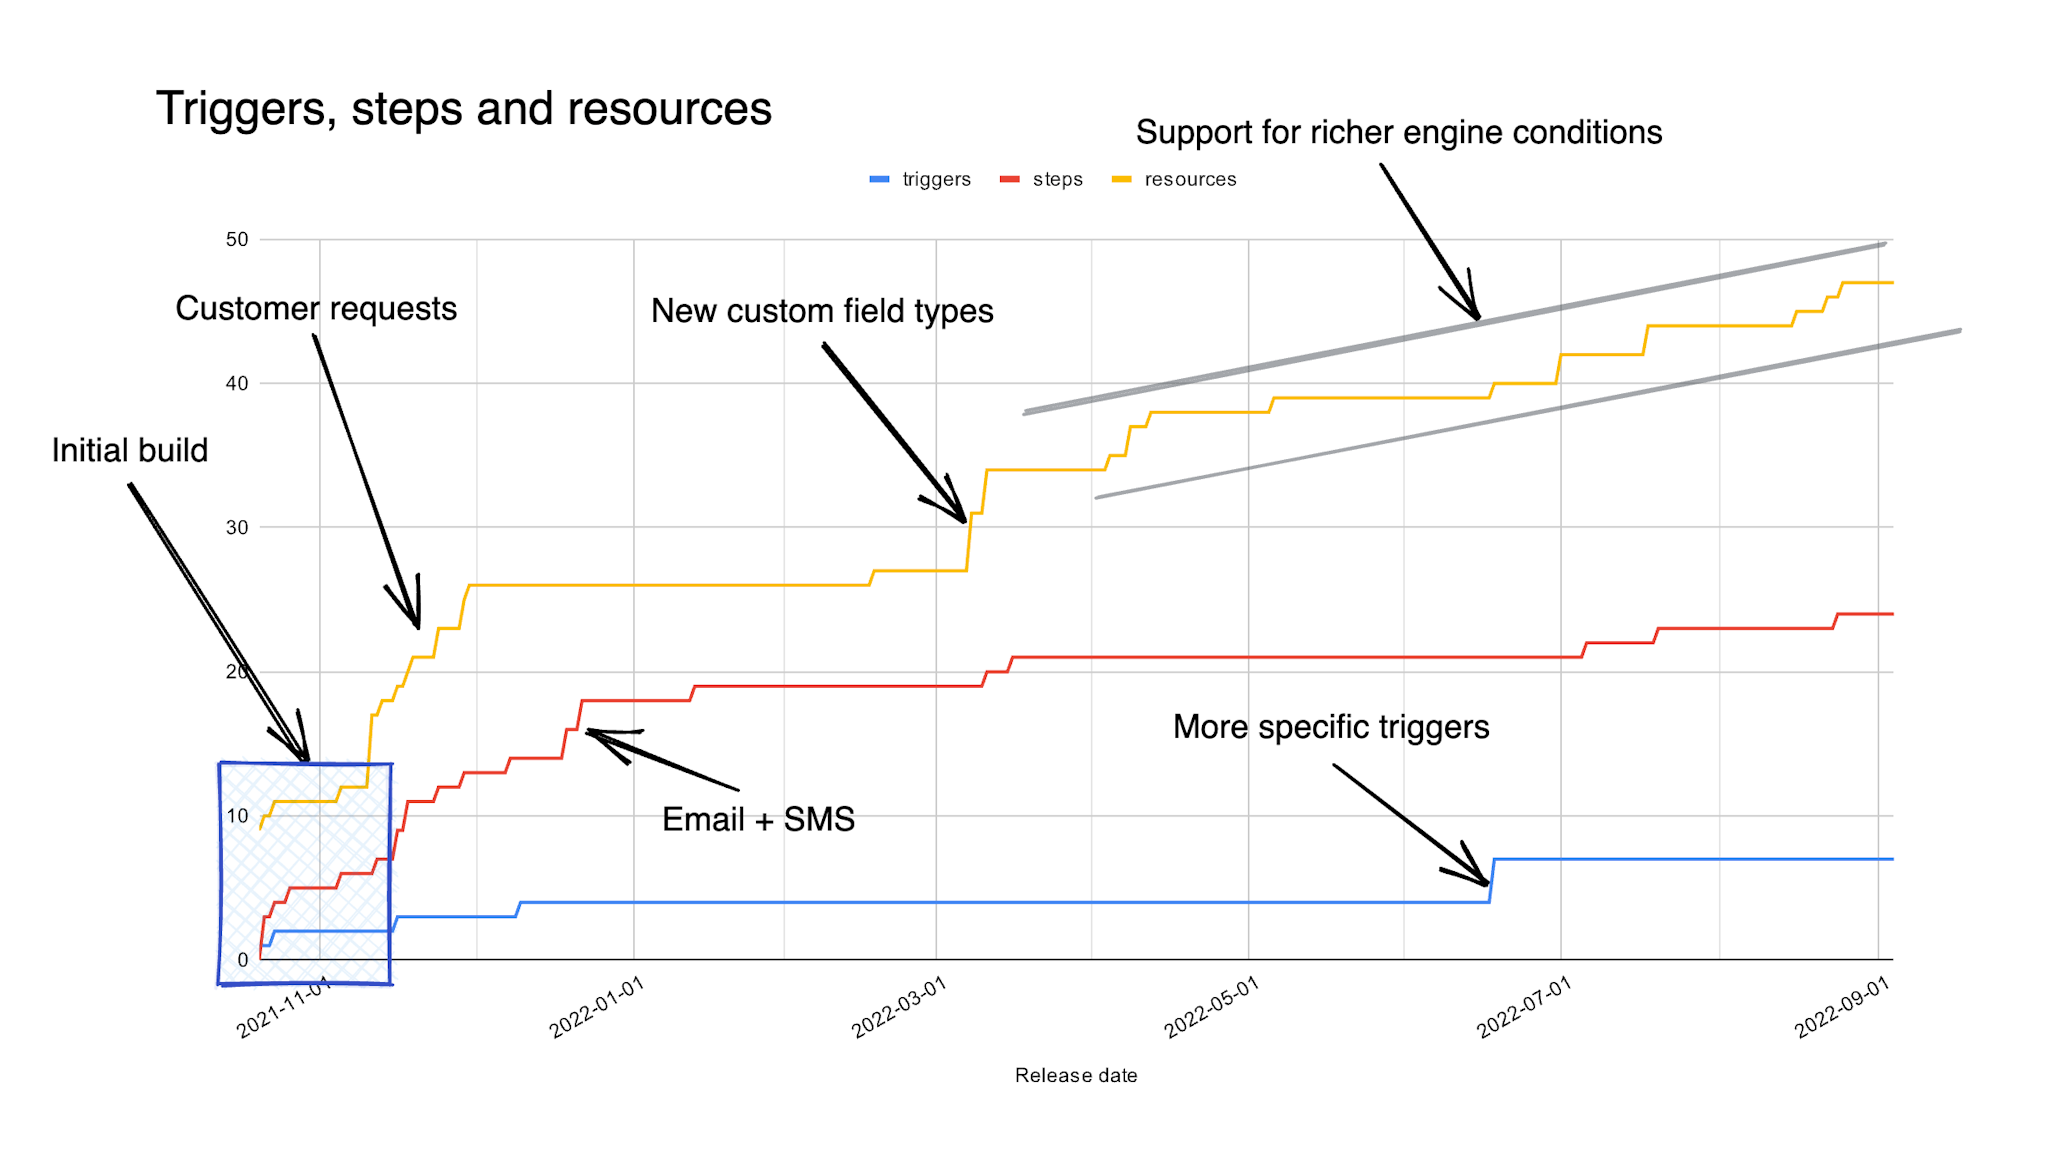 Chart showing the rate of adding steps, trigger and resources, past the initial build